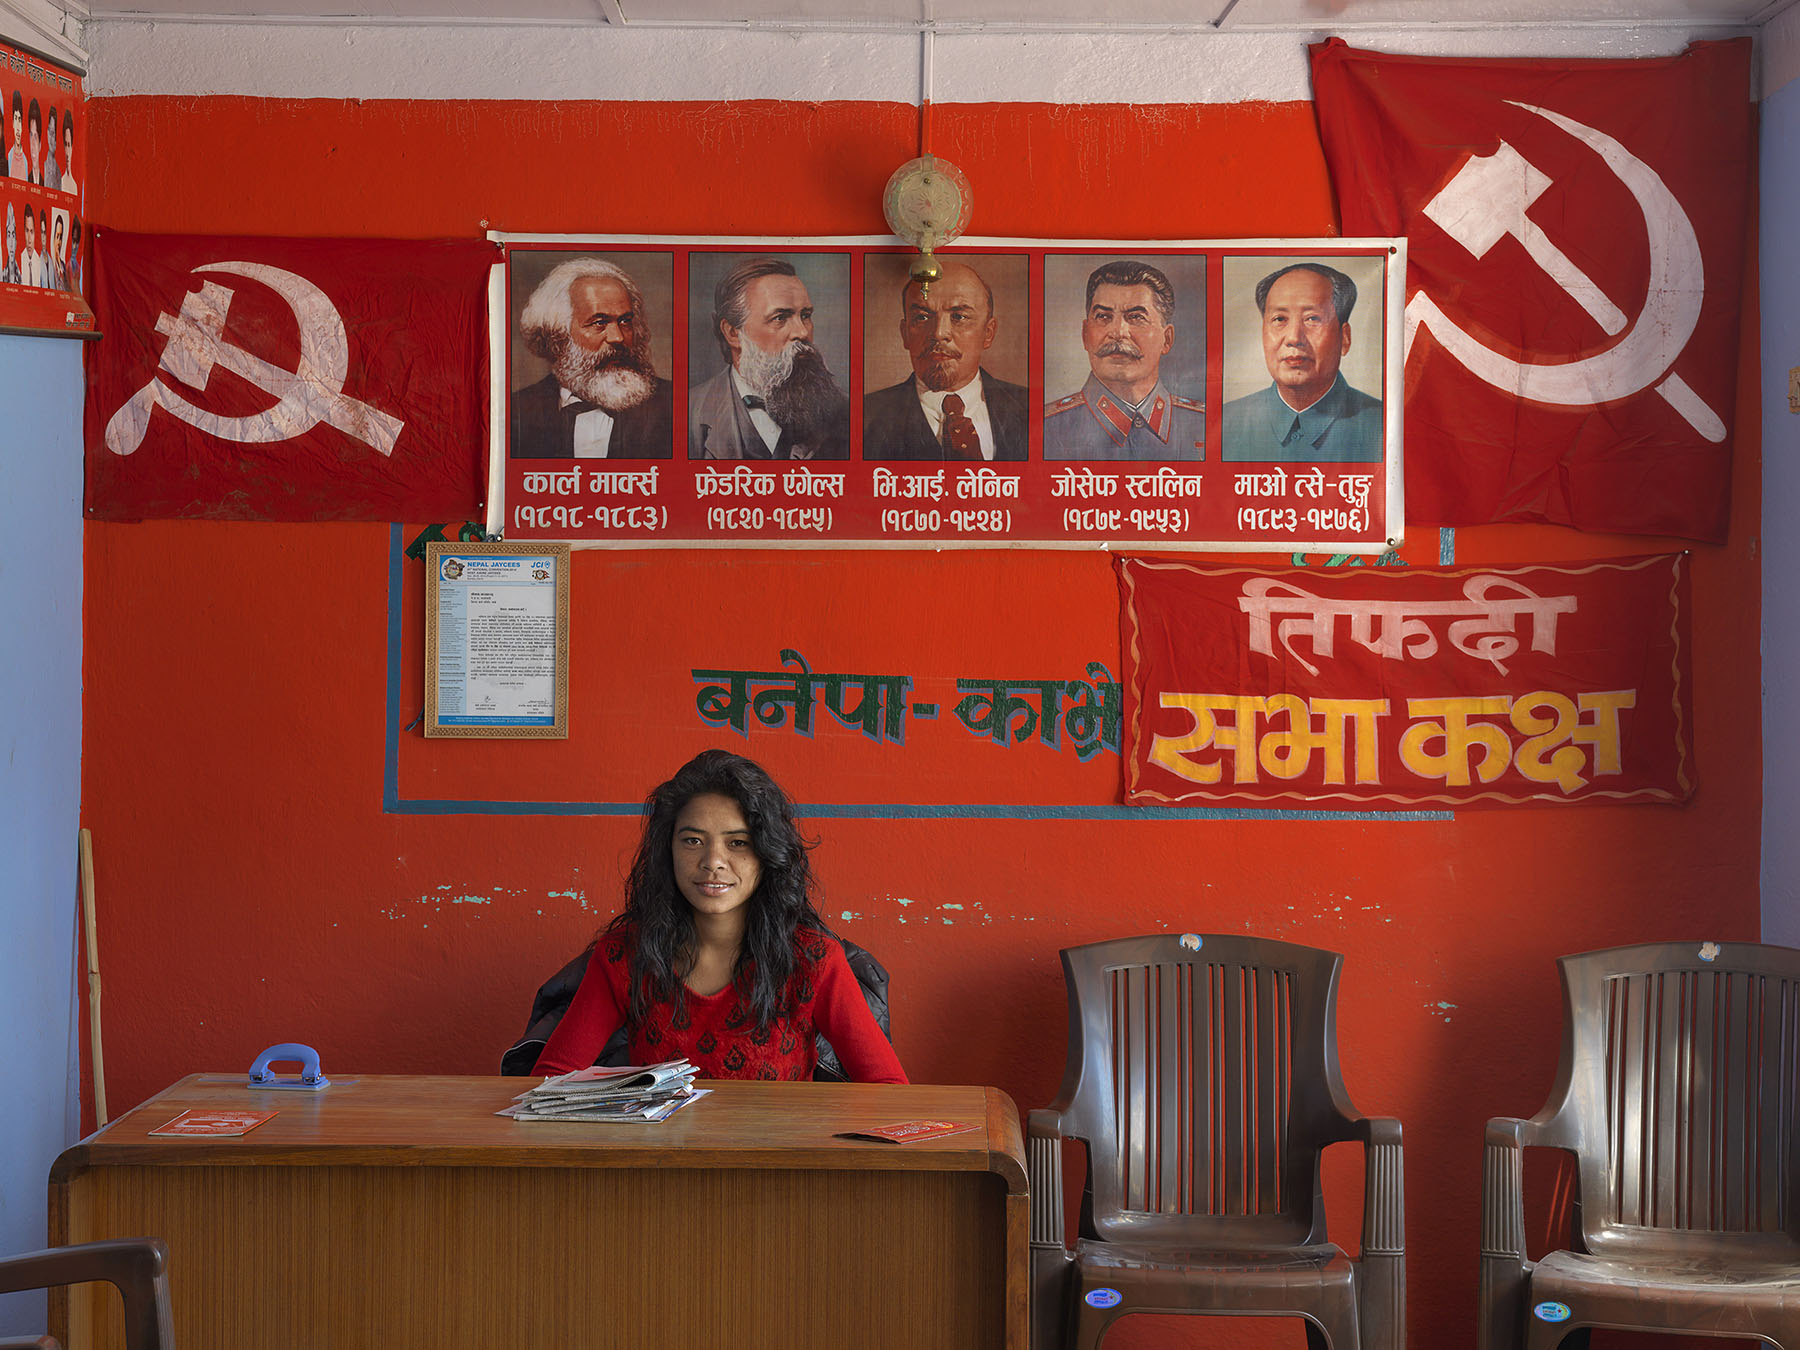 Nepal, communism. Communist Party of Nepal (Revolutionary Maoist), aka CPN-Maoist (Baidya), led by Mohan Baidya: district office in Banepa, Bagmati zone. Gita Rasaili (25), office secretary.
Baidya’s party split from the main United Communist Party of Nepal (Maoist) in 2012. It did not participate in the 2013 Constituent Assembly elections.